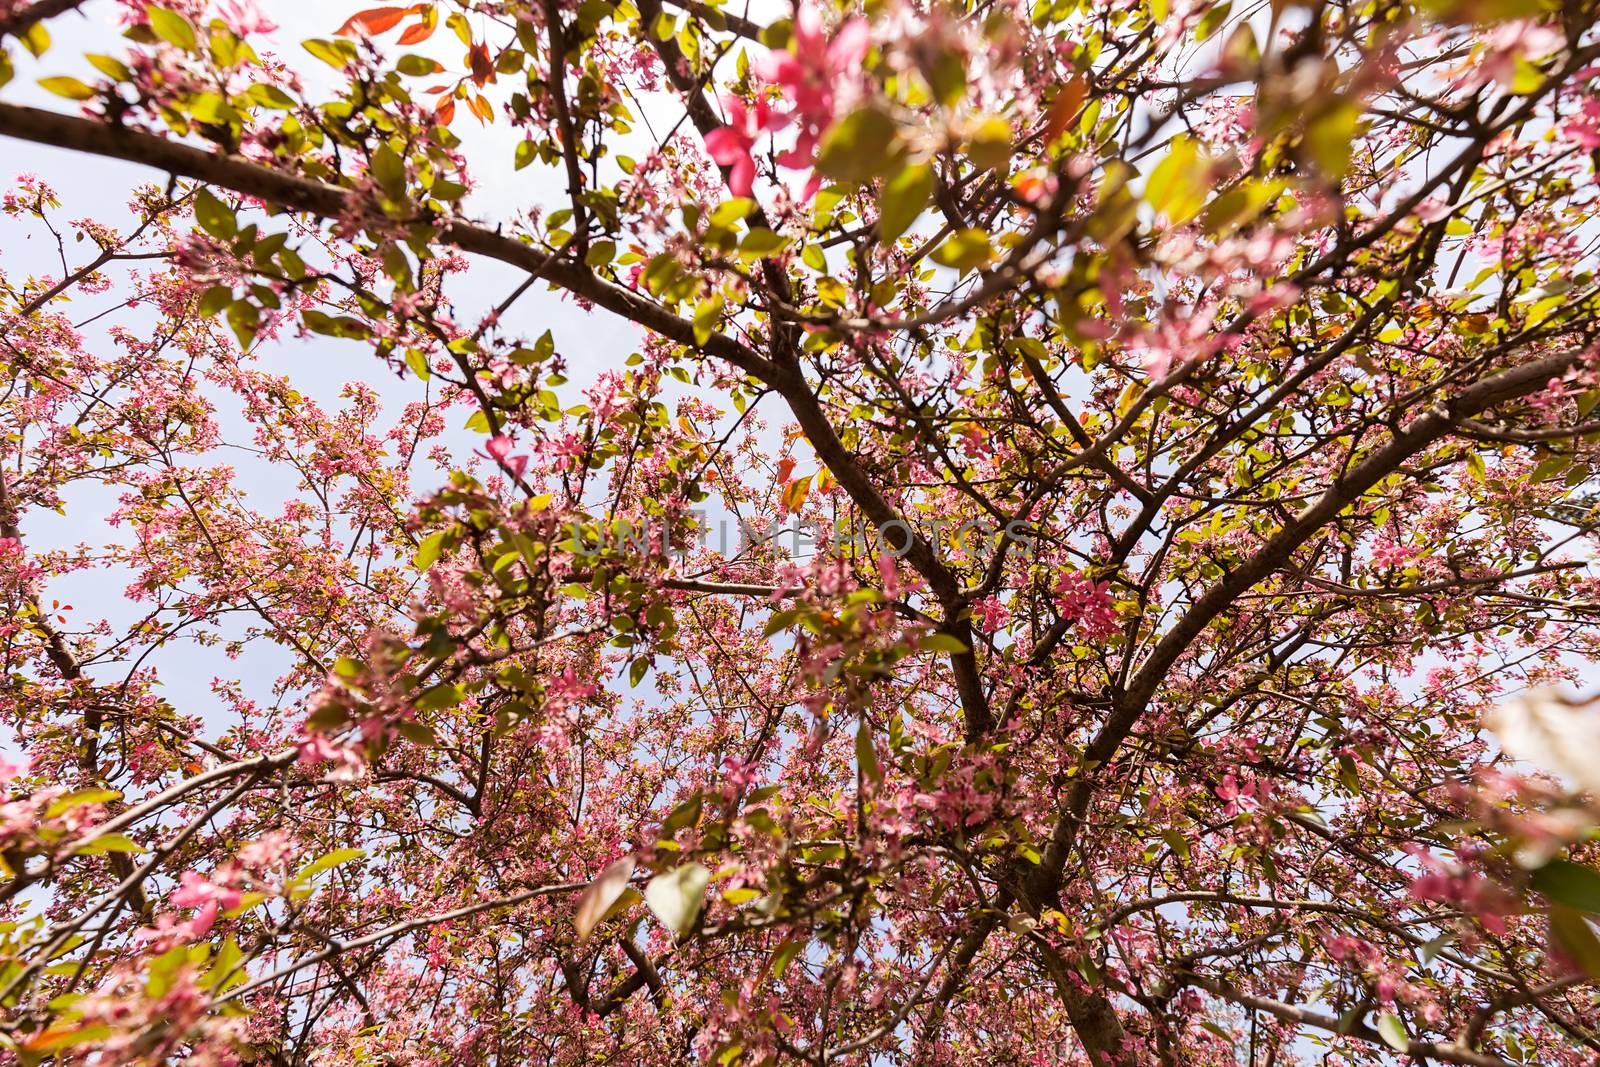 blossomed tree with pink flowers, note shallow depth of field